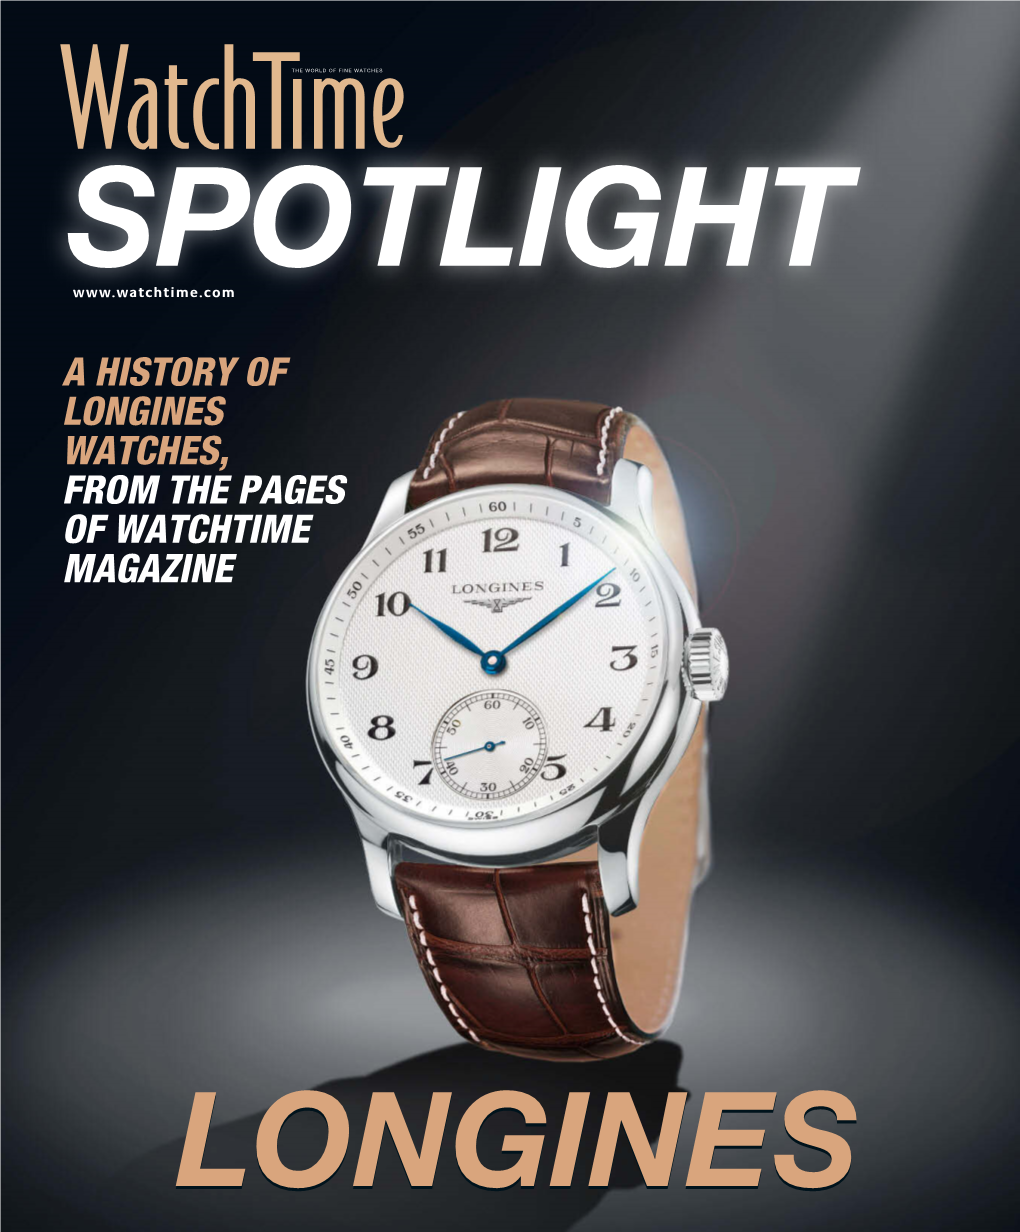 A History of Longines Watches, from the Pages of Watchtime Magazine